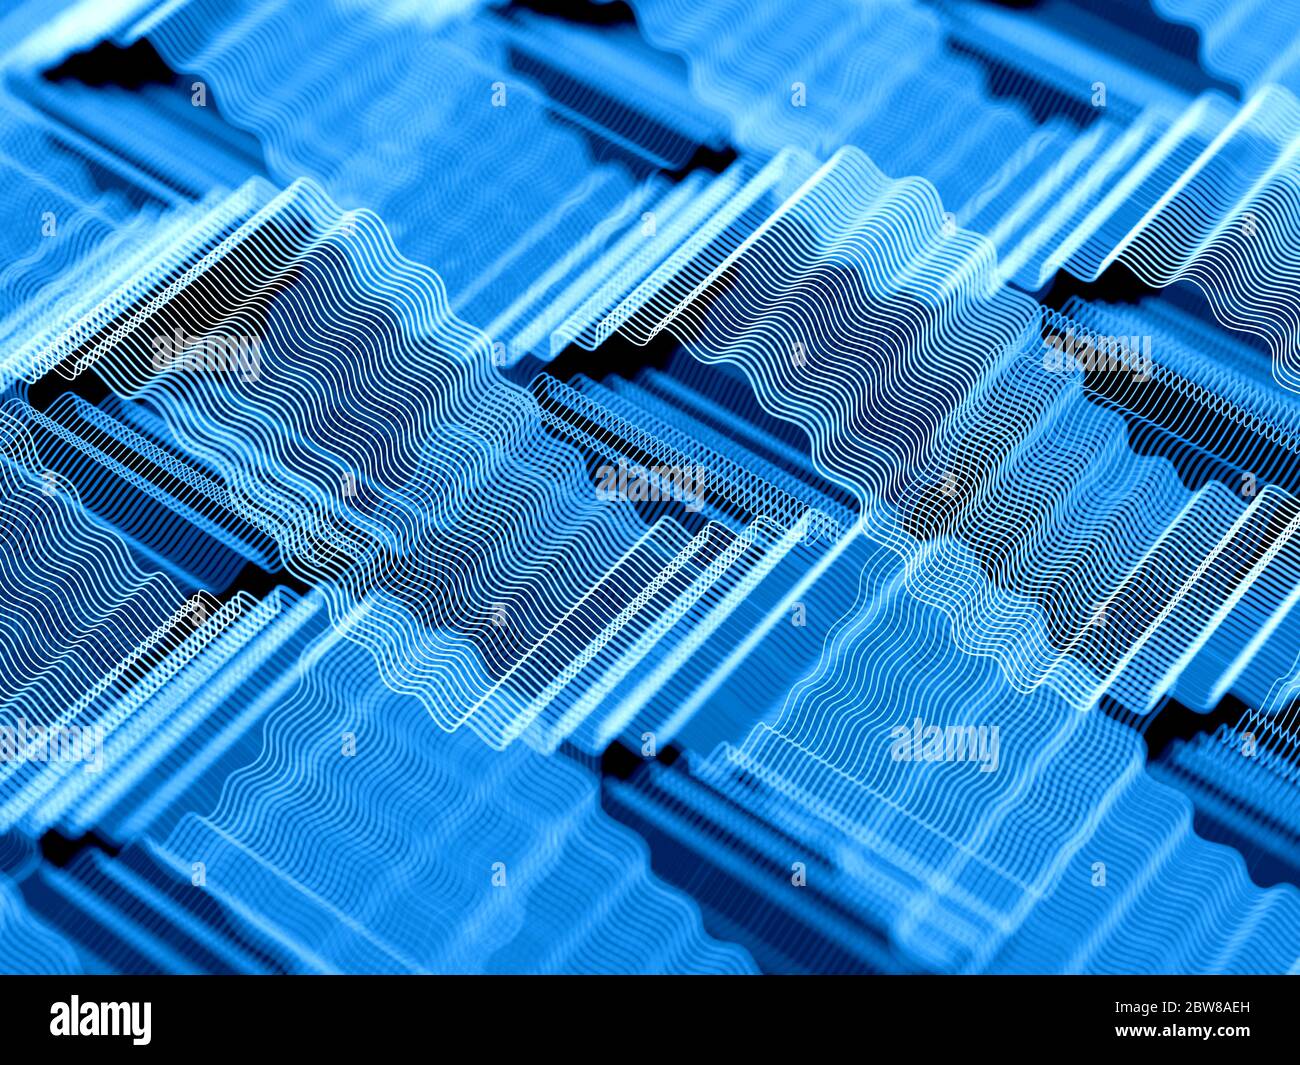 Concept of blue high frequency waves Stock Photo